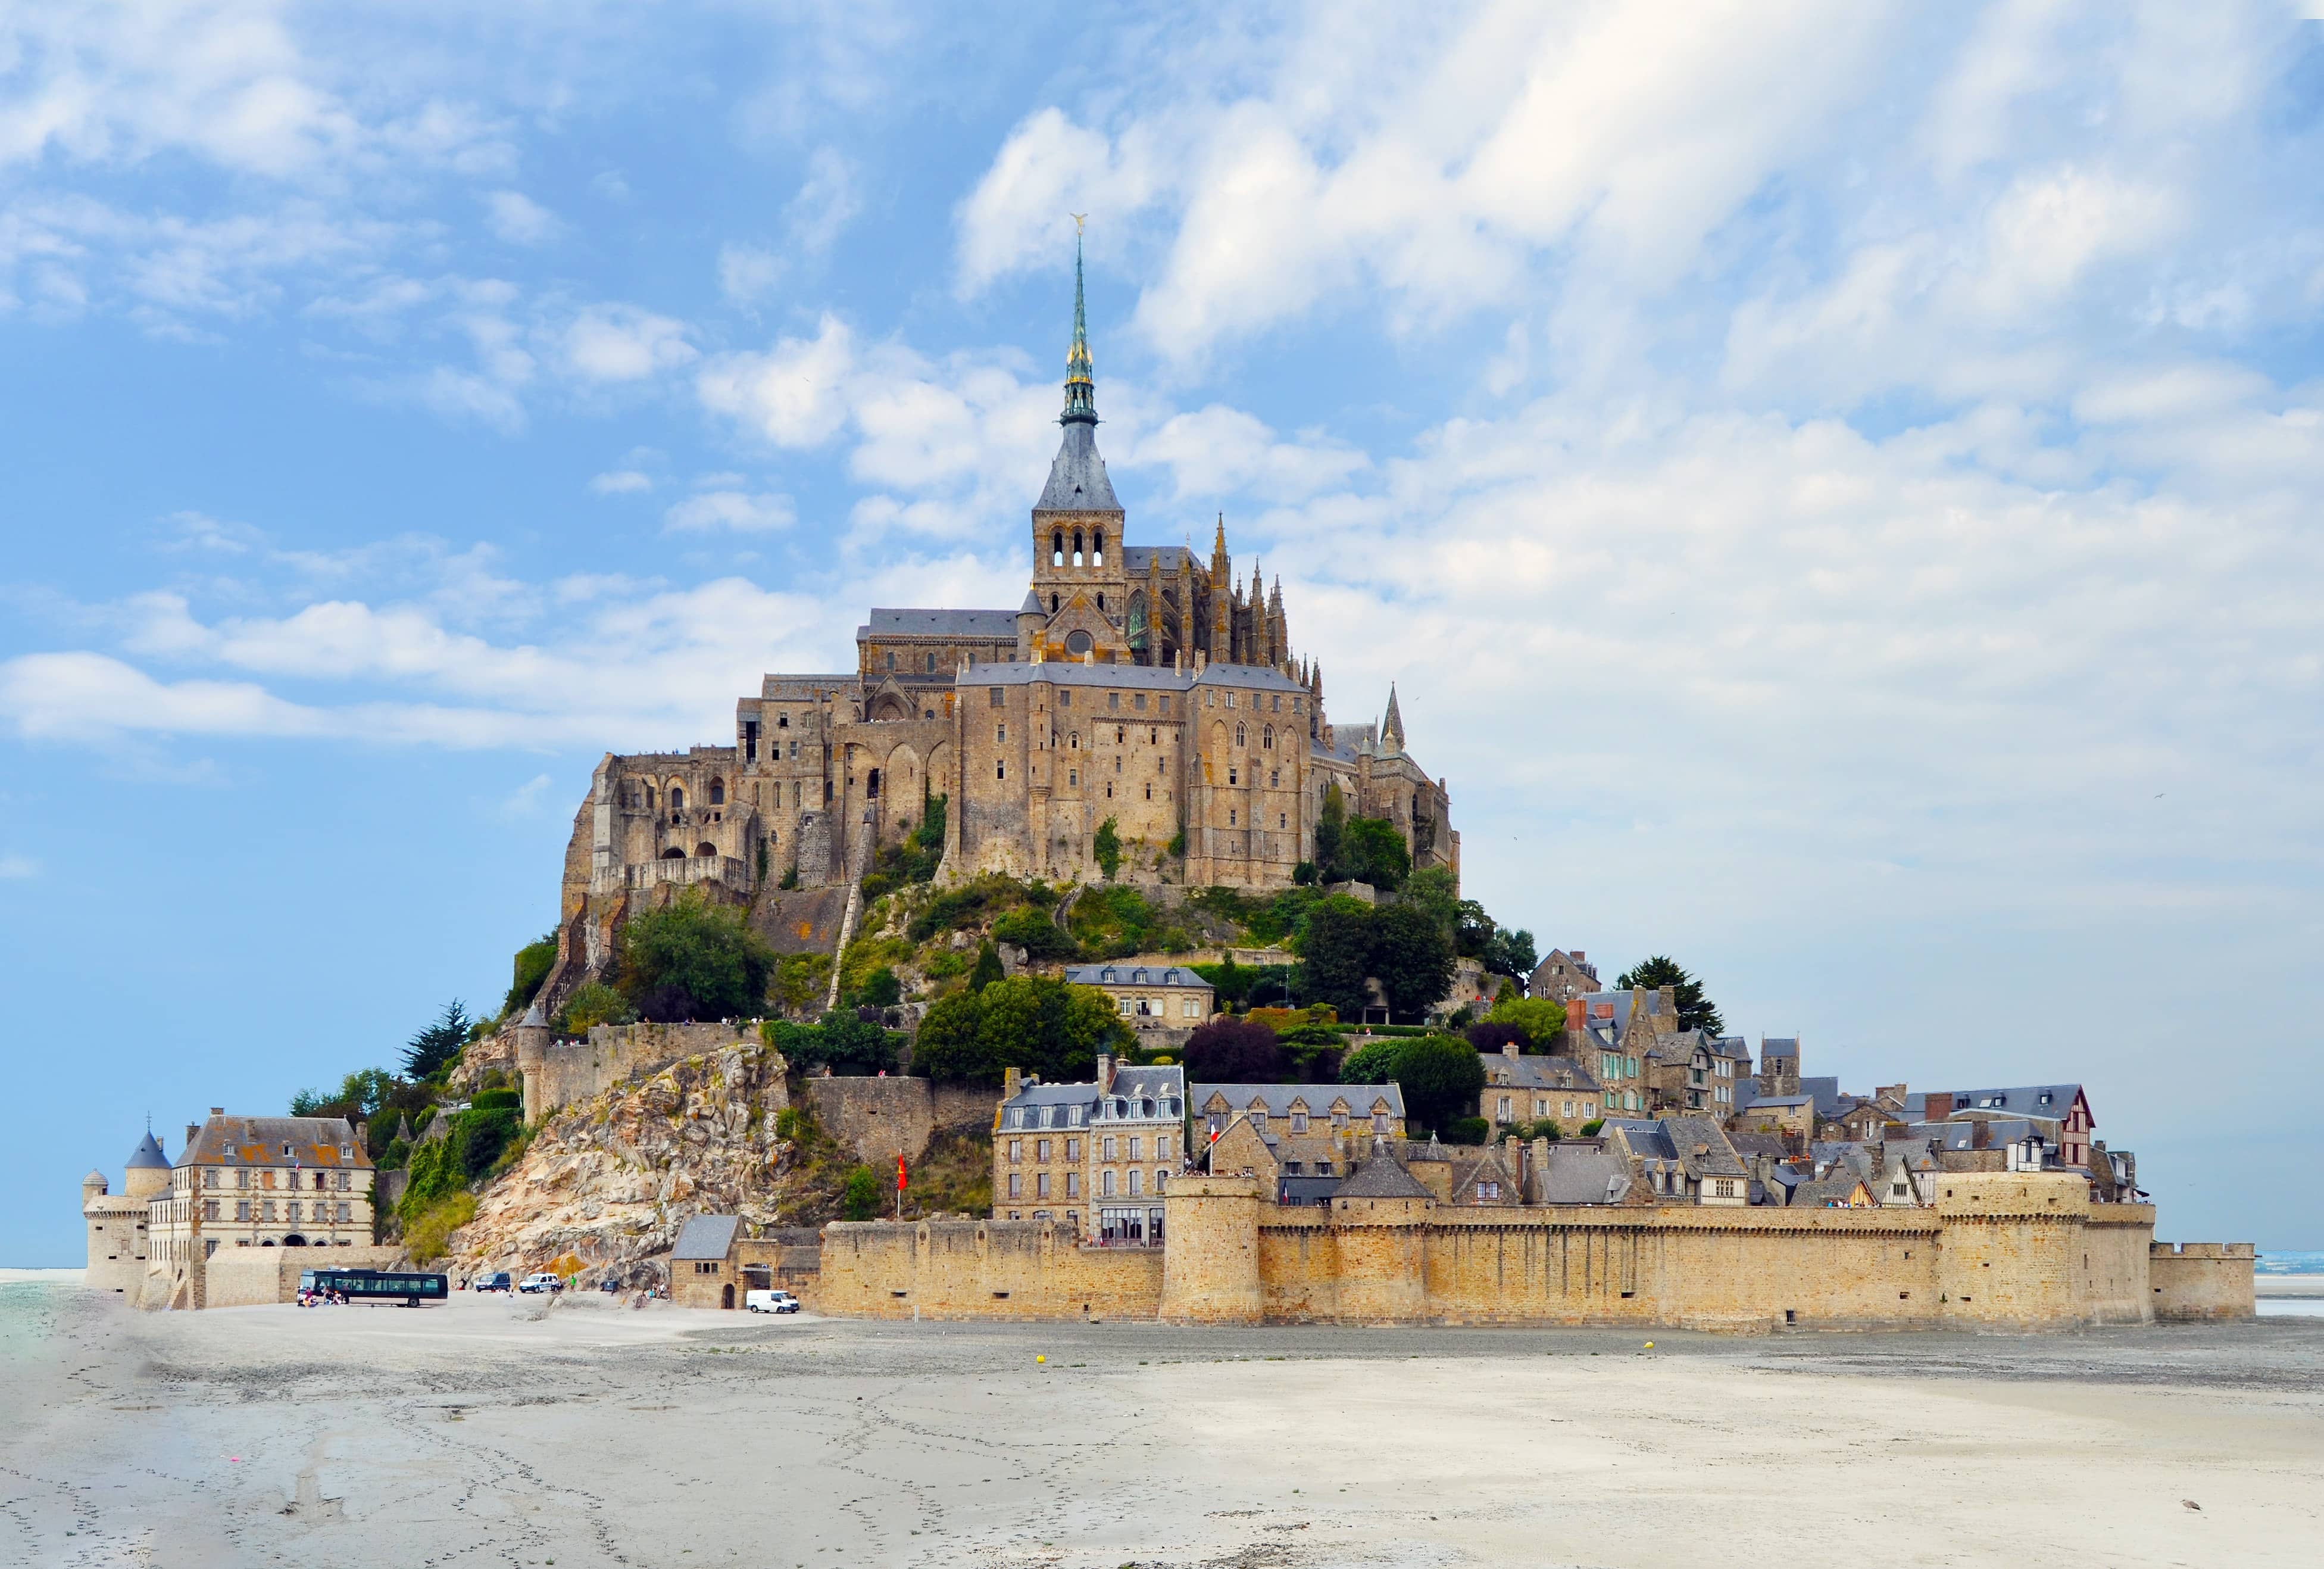 View of the UNESCO World Heritage site and its Gothic architecture, Le Mont Saint-Michel, Normandy-Brittany border